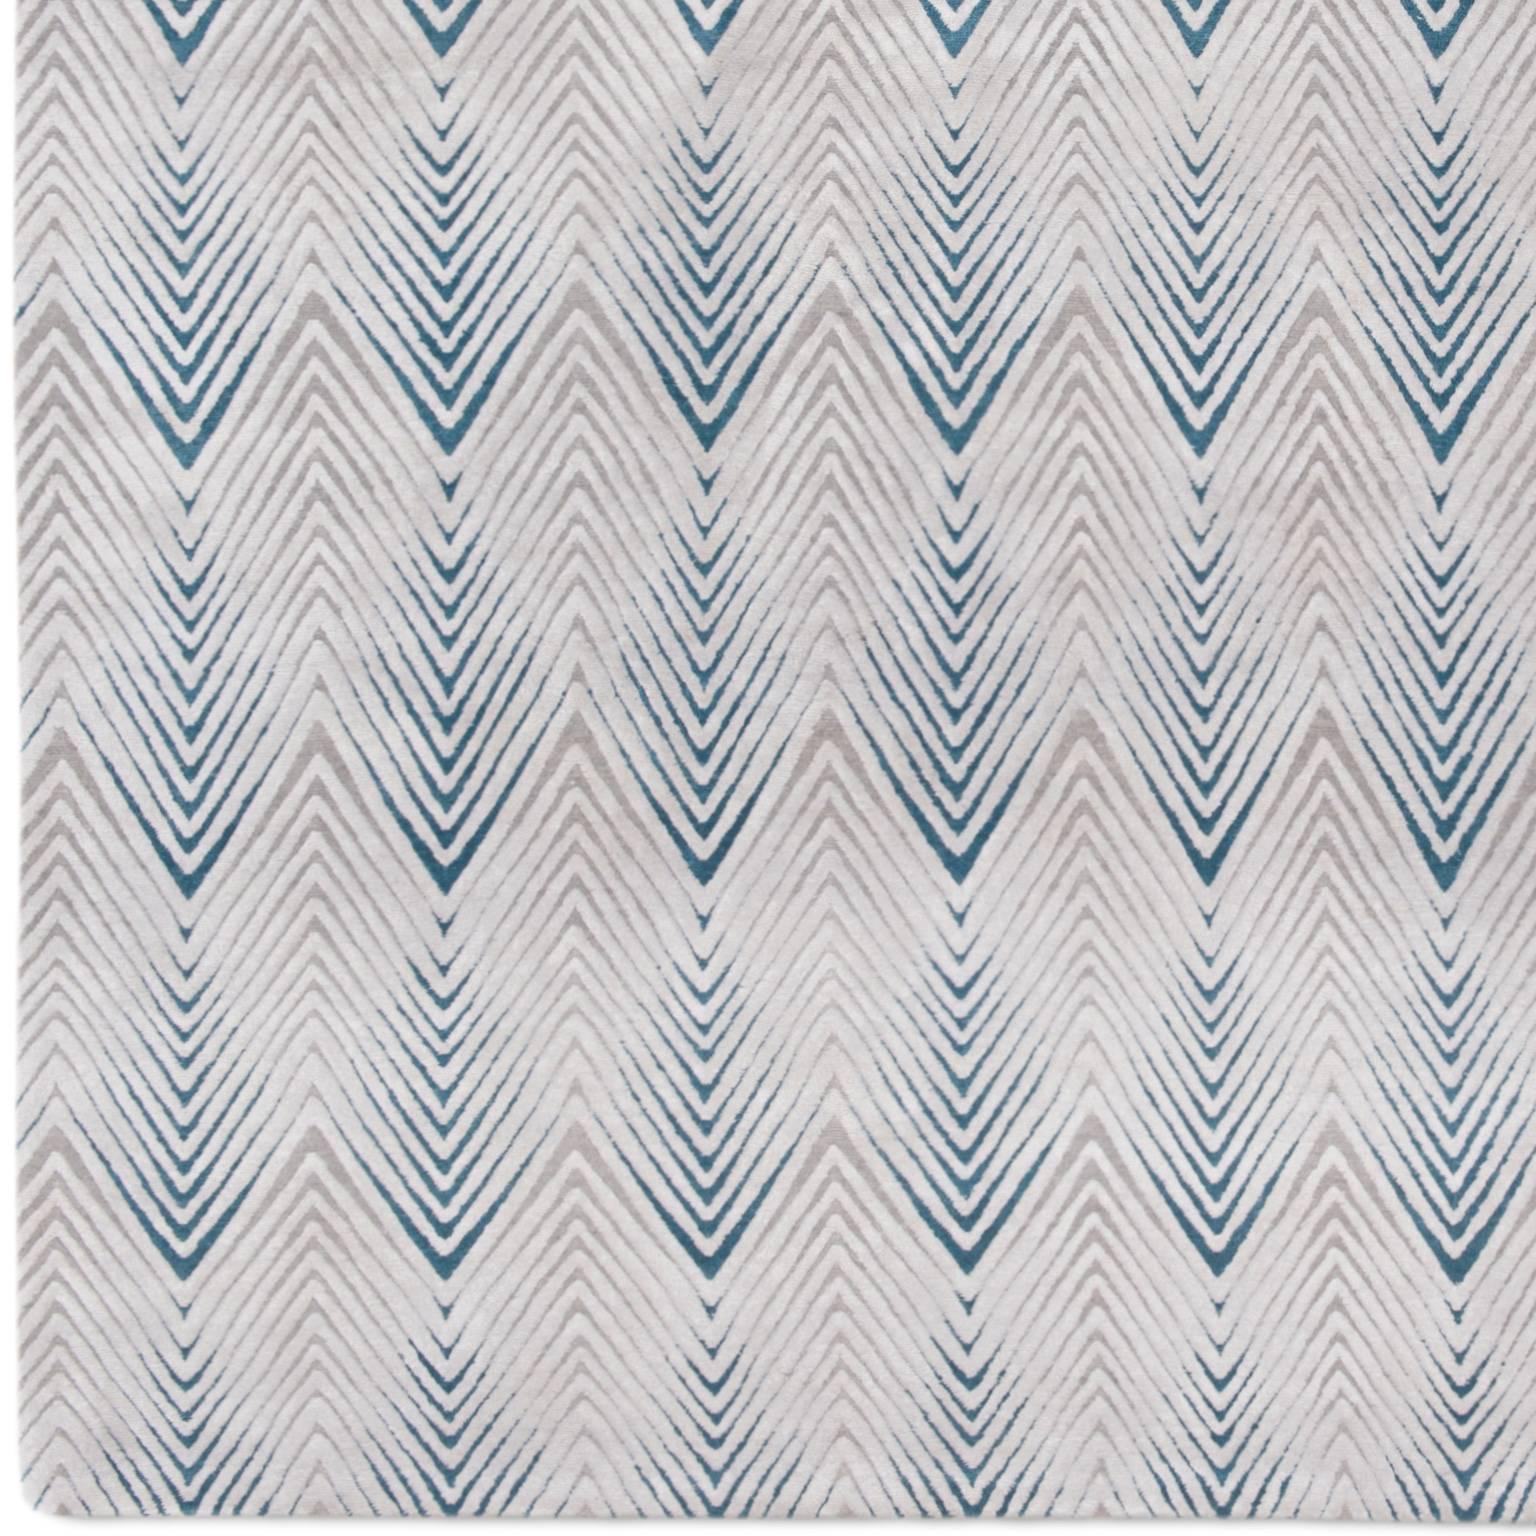 'Diamond Stripe' is from the Knots rugs new 2018 collection. This rug is produced in 150 knot quality in a high low pile. The chevron design is raised and in Chinese silk and the blush and soft mauve background is a lower pile in Tibetan wool. Also